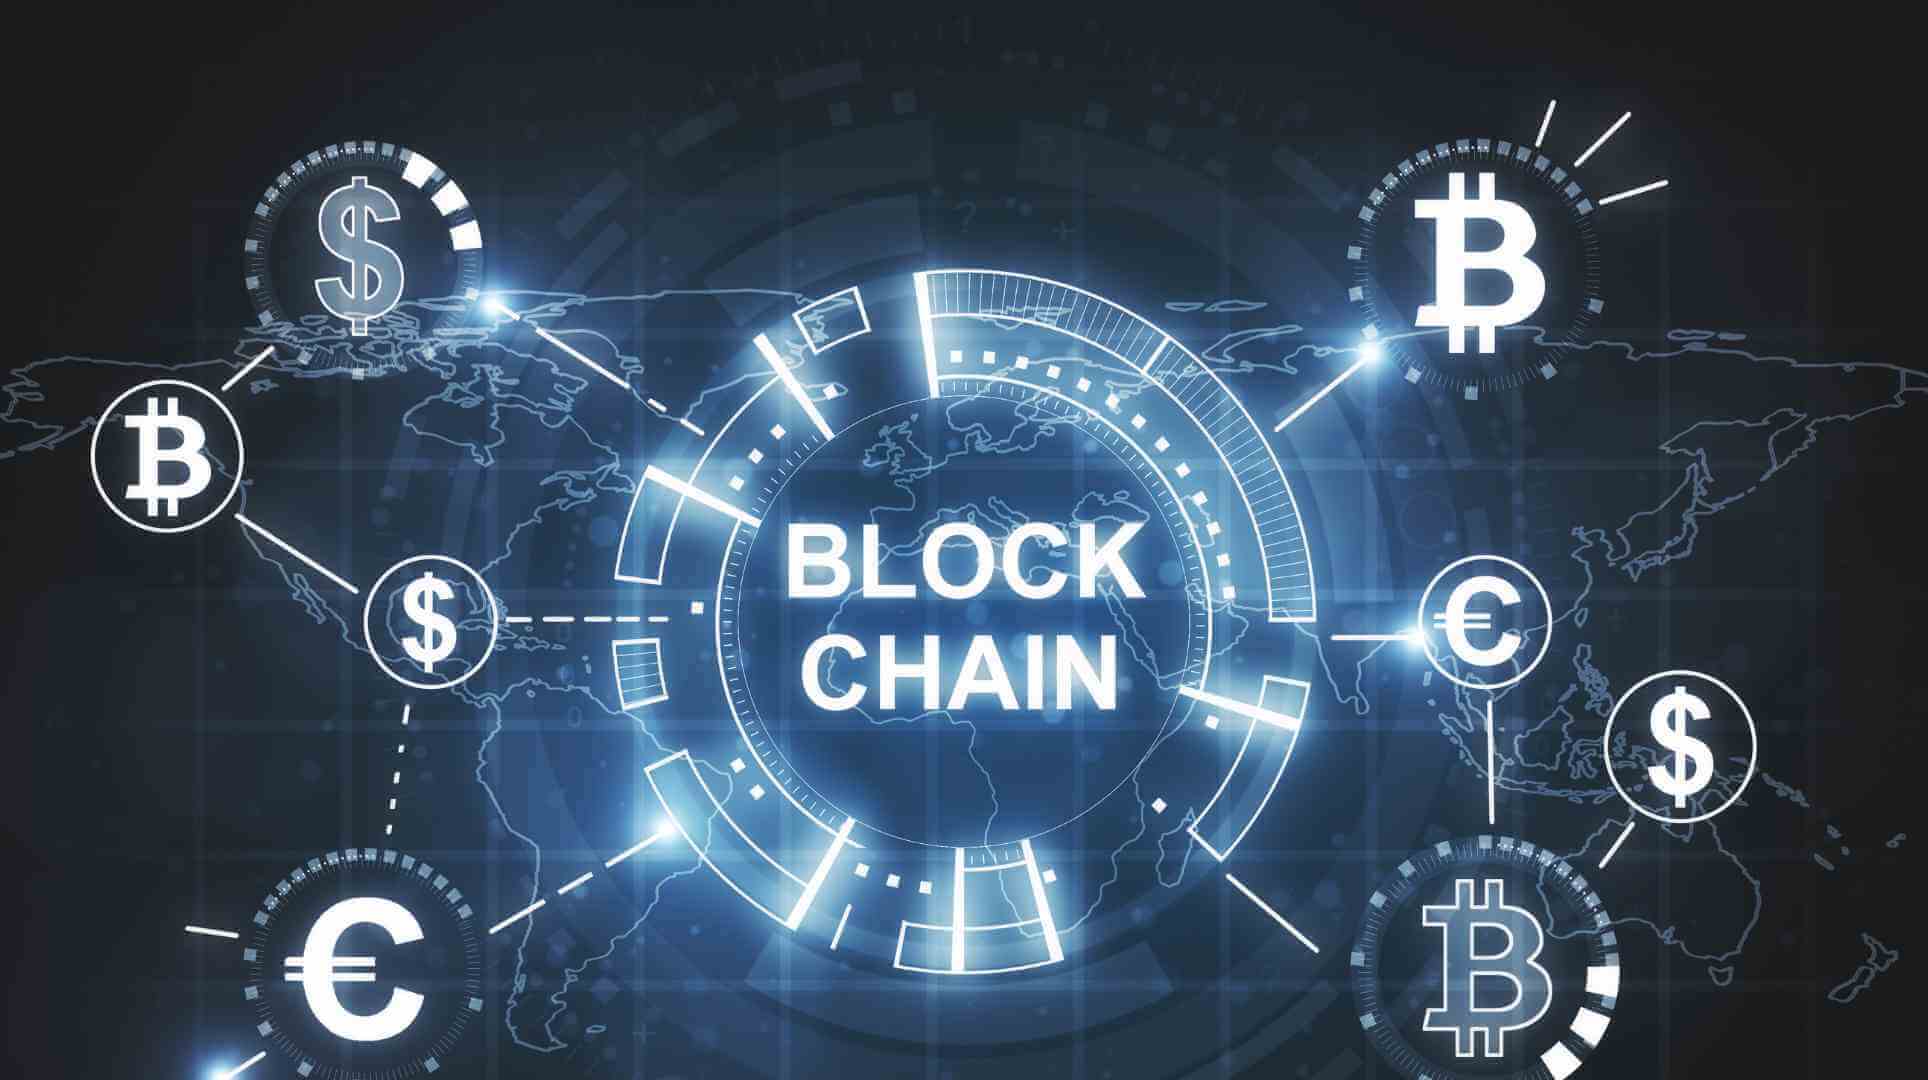 Blockchain for Trust and Transparency